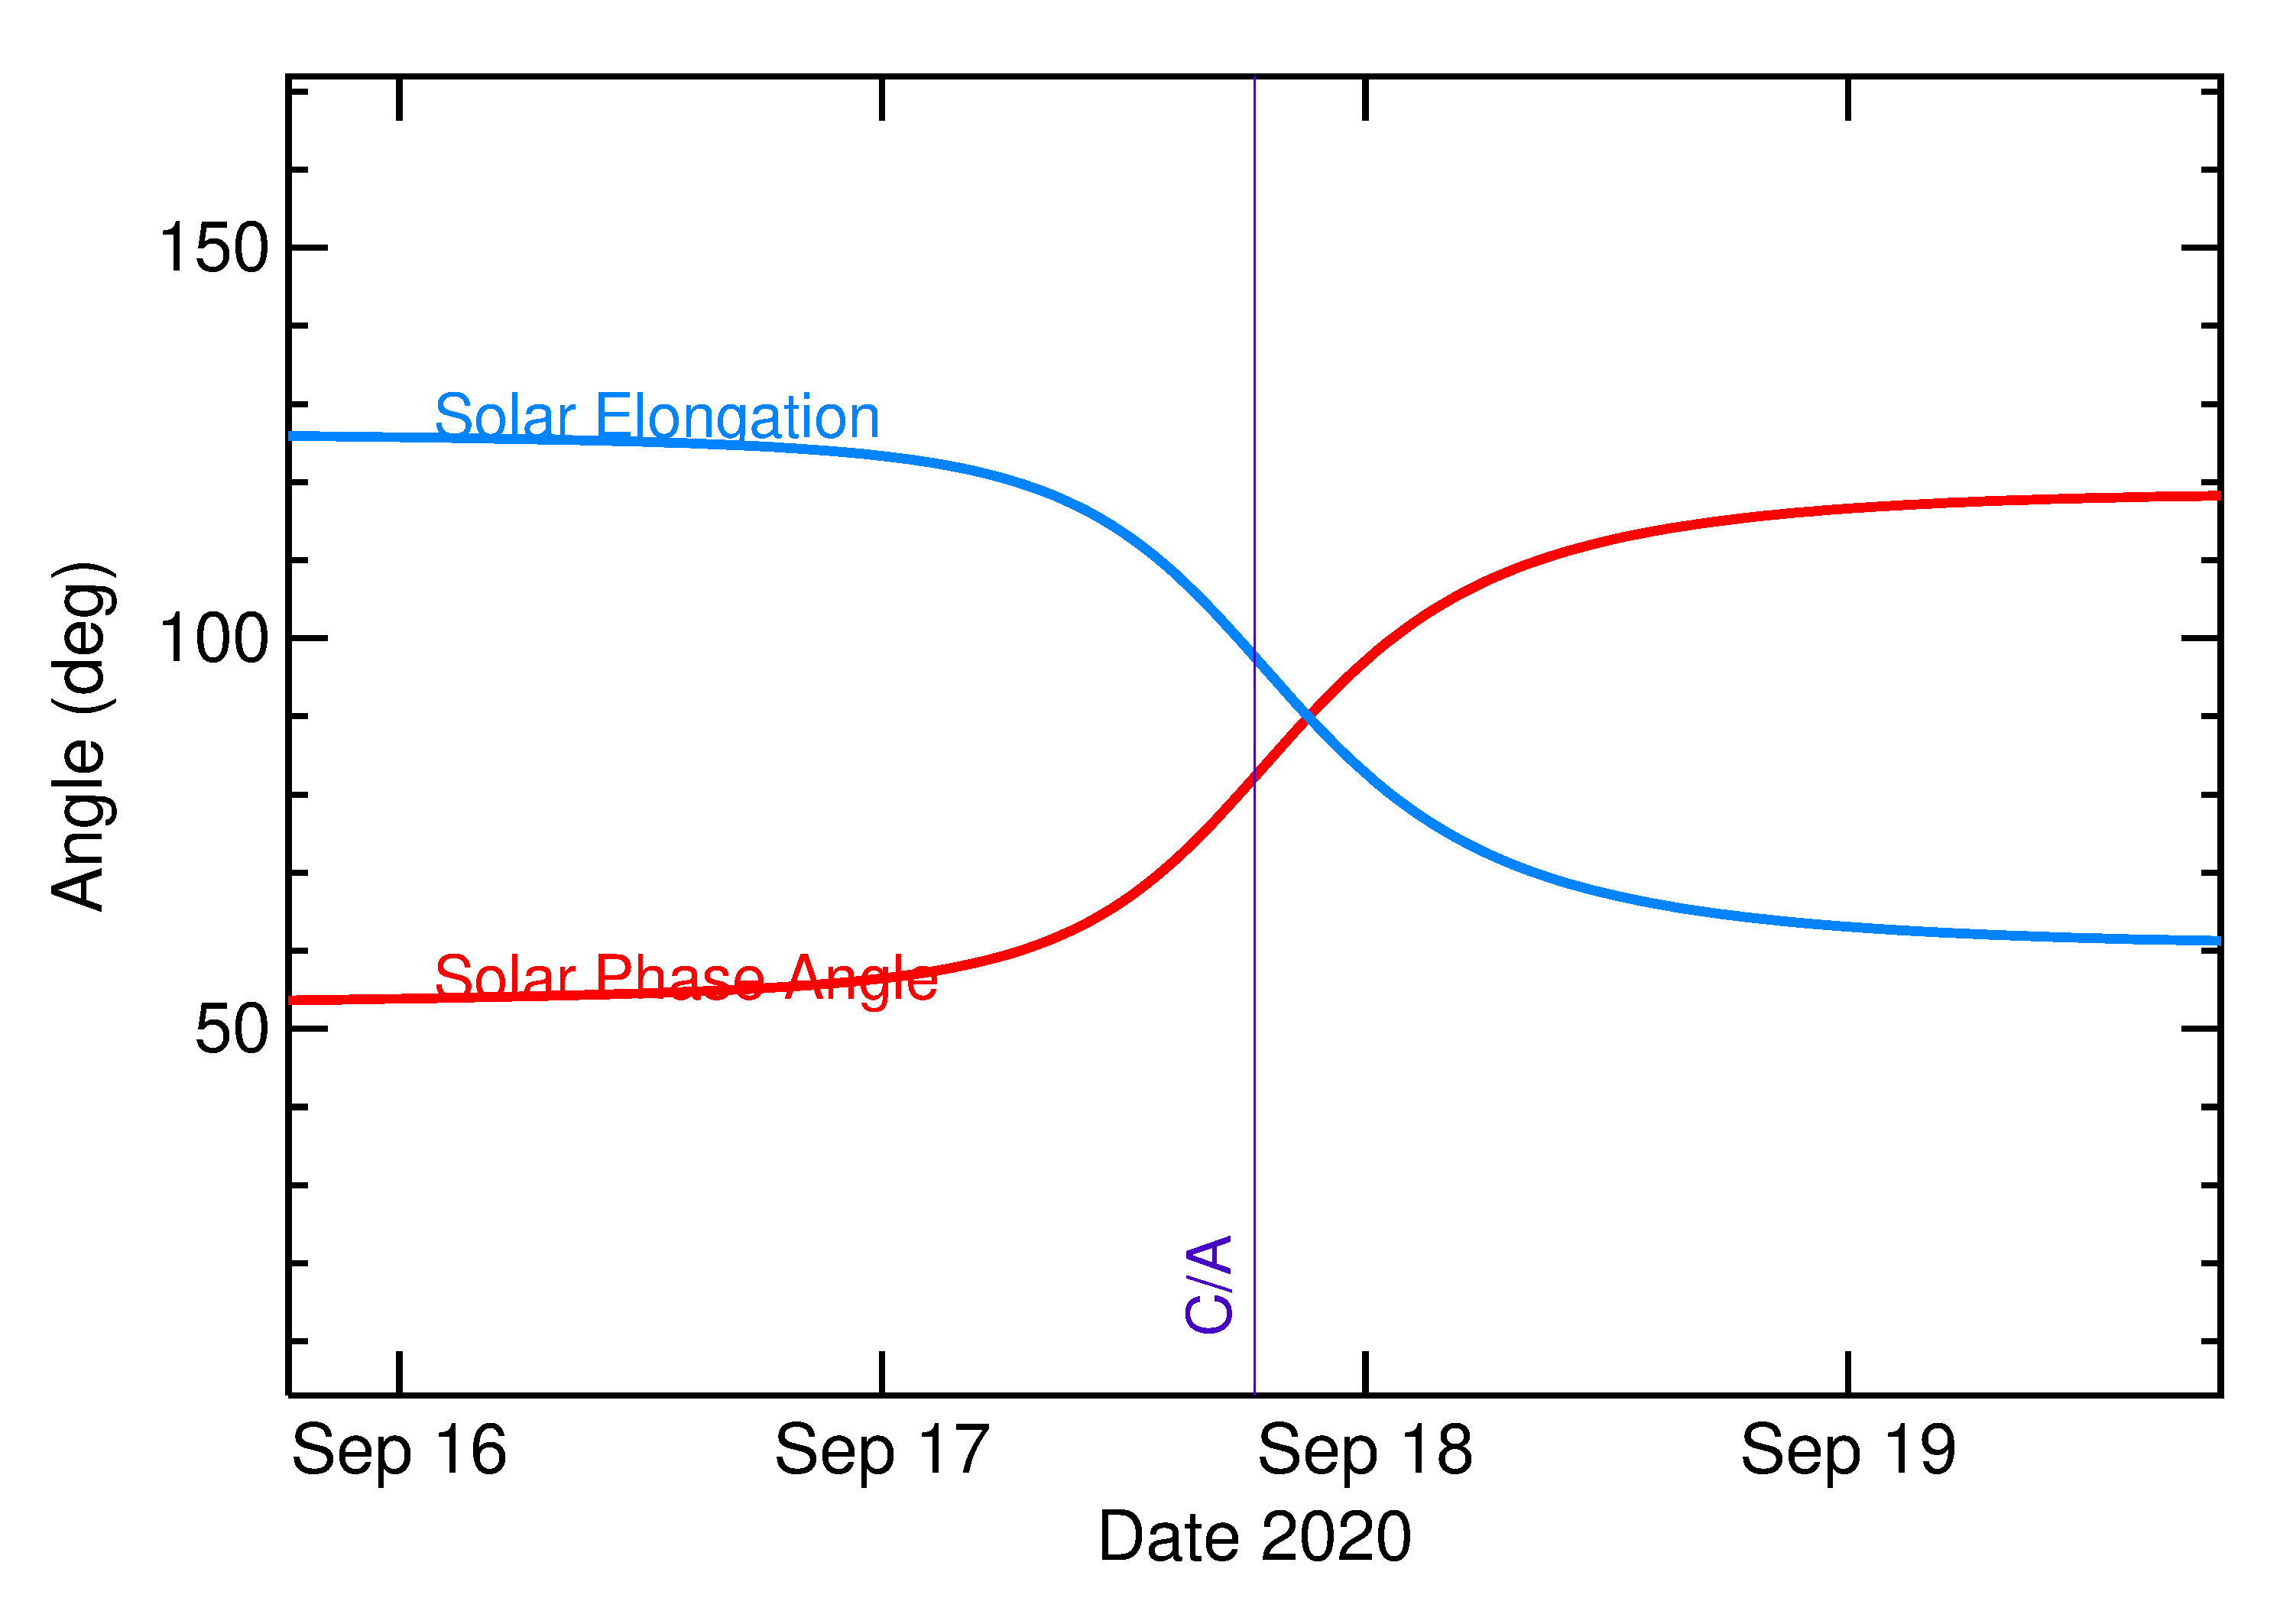 Solar Elongation and Solar Phase Angle of 2020 RZ6 in the days around closest approach